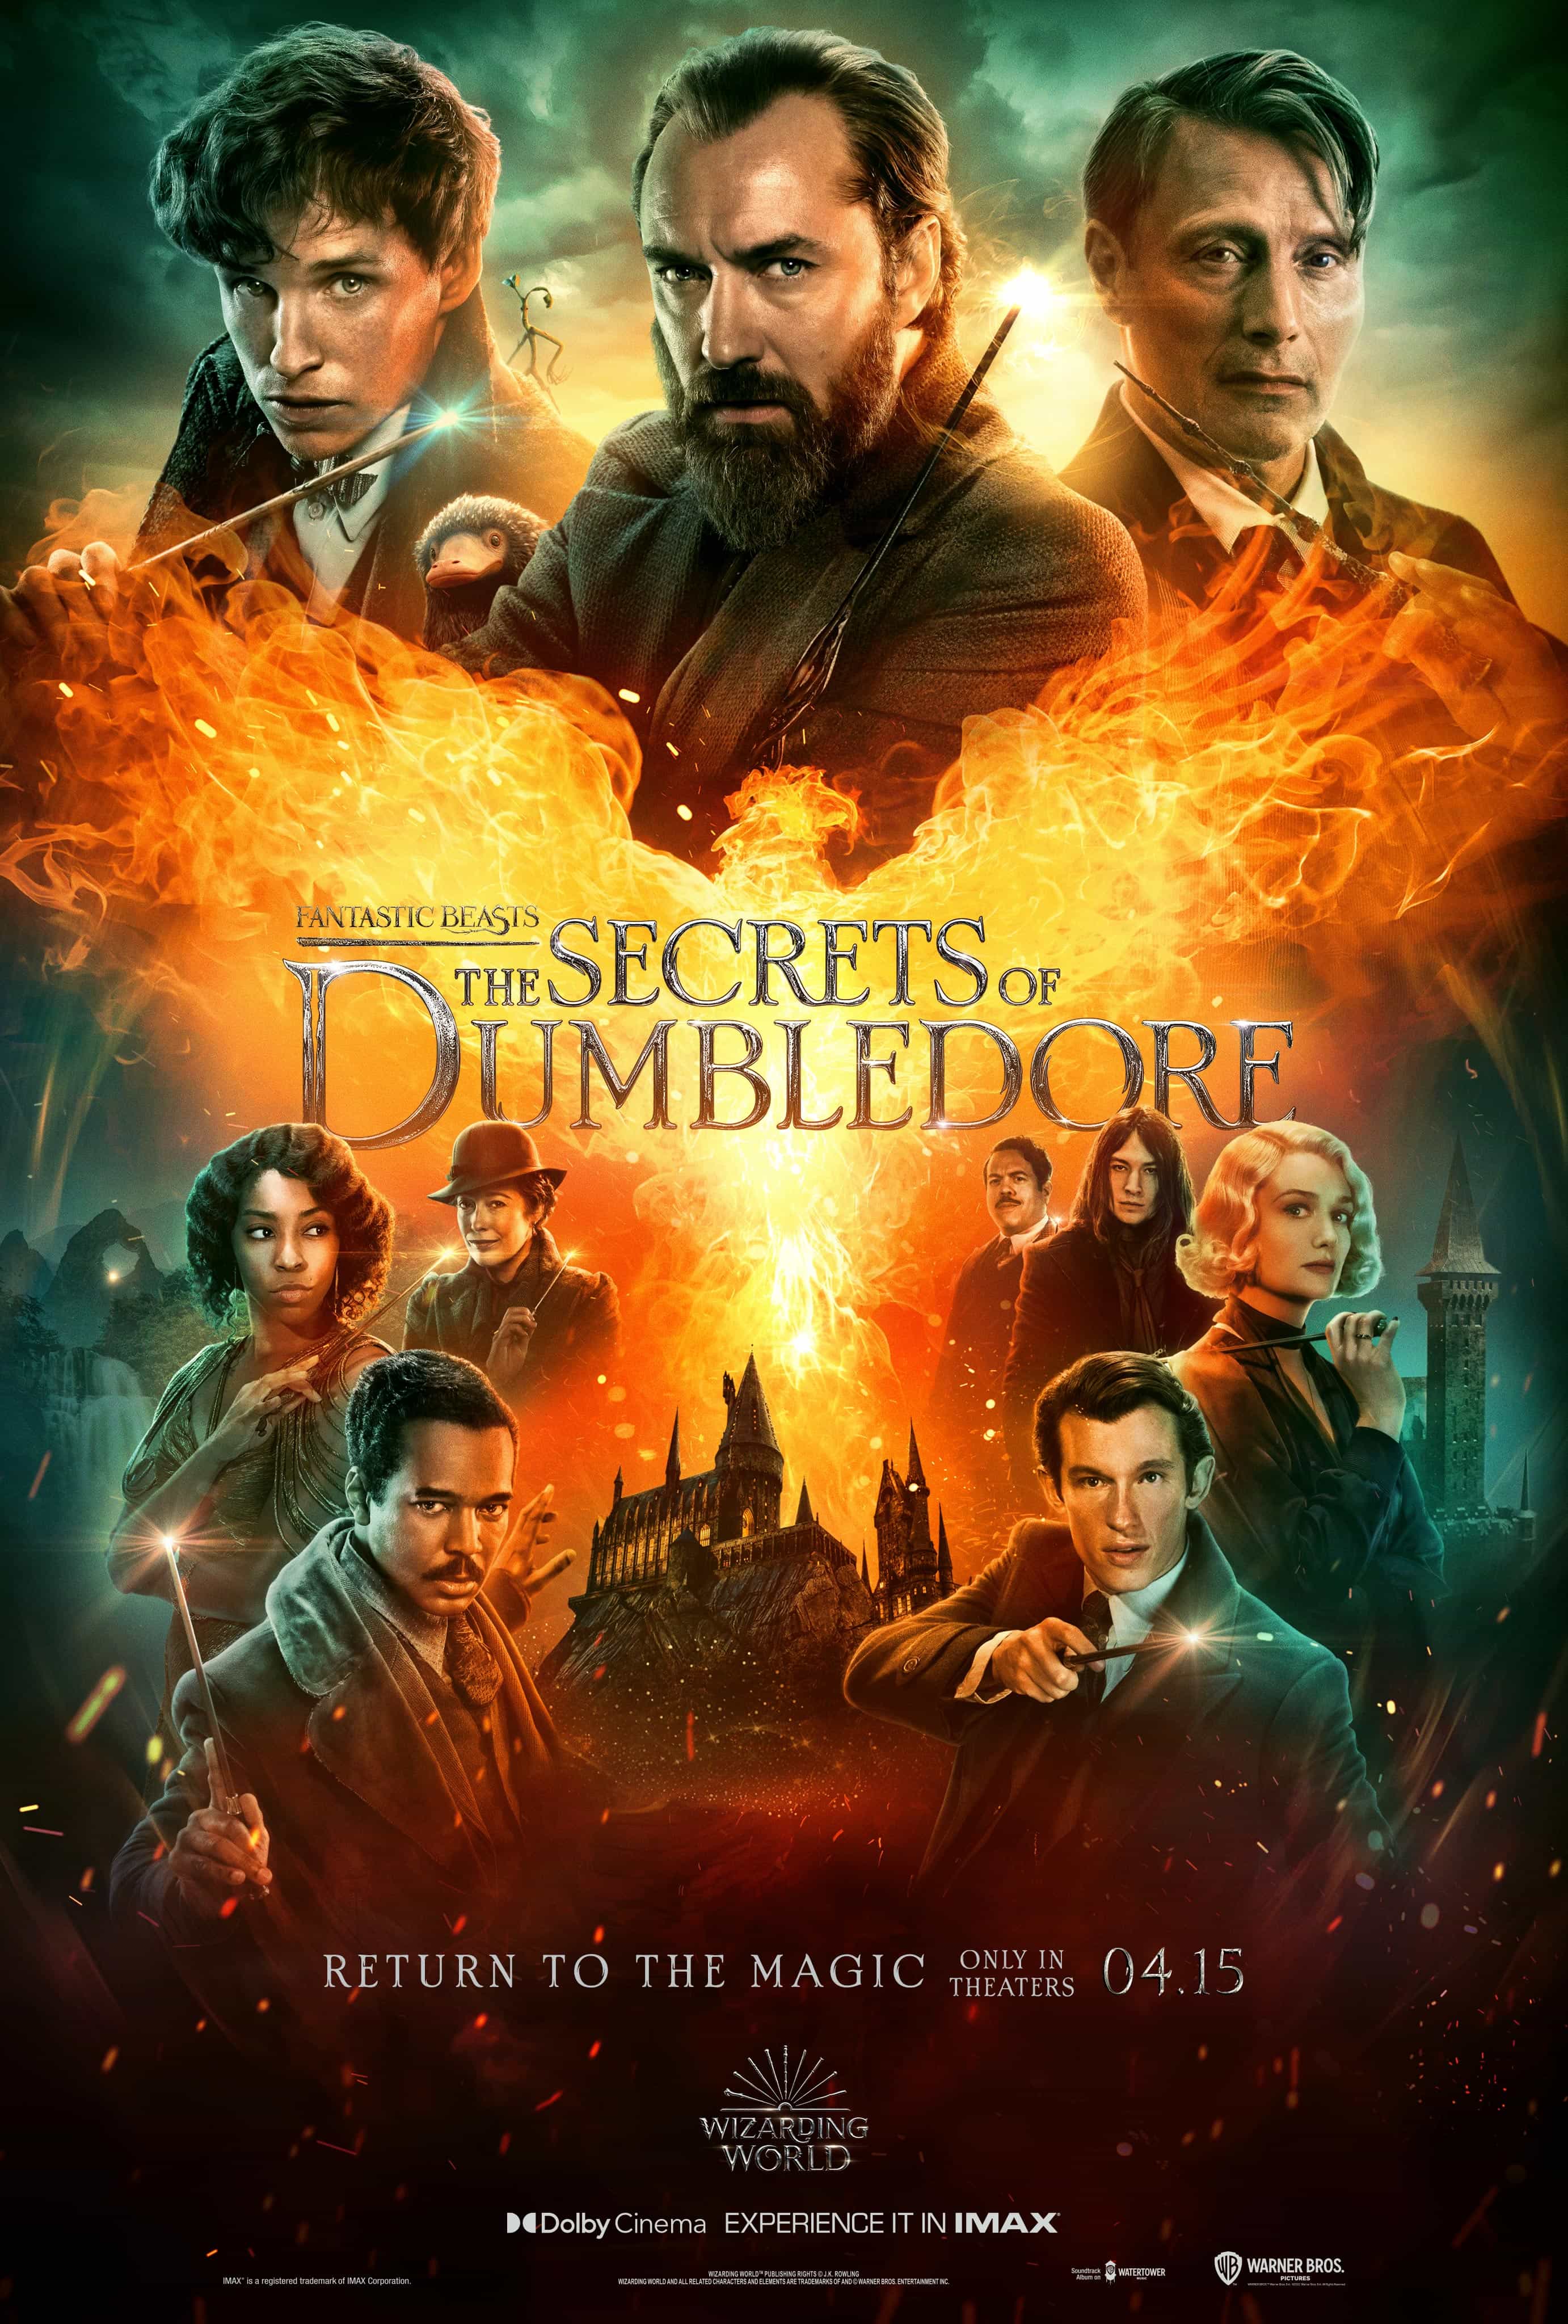 First trailer for Fantastic beasts: The Secrets of Dumbledore - movie release date 15th April 2022